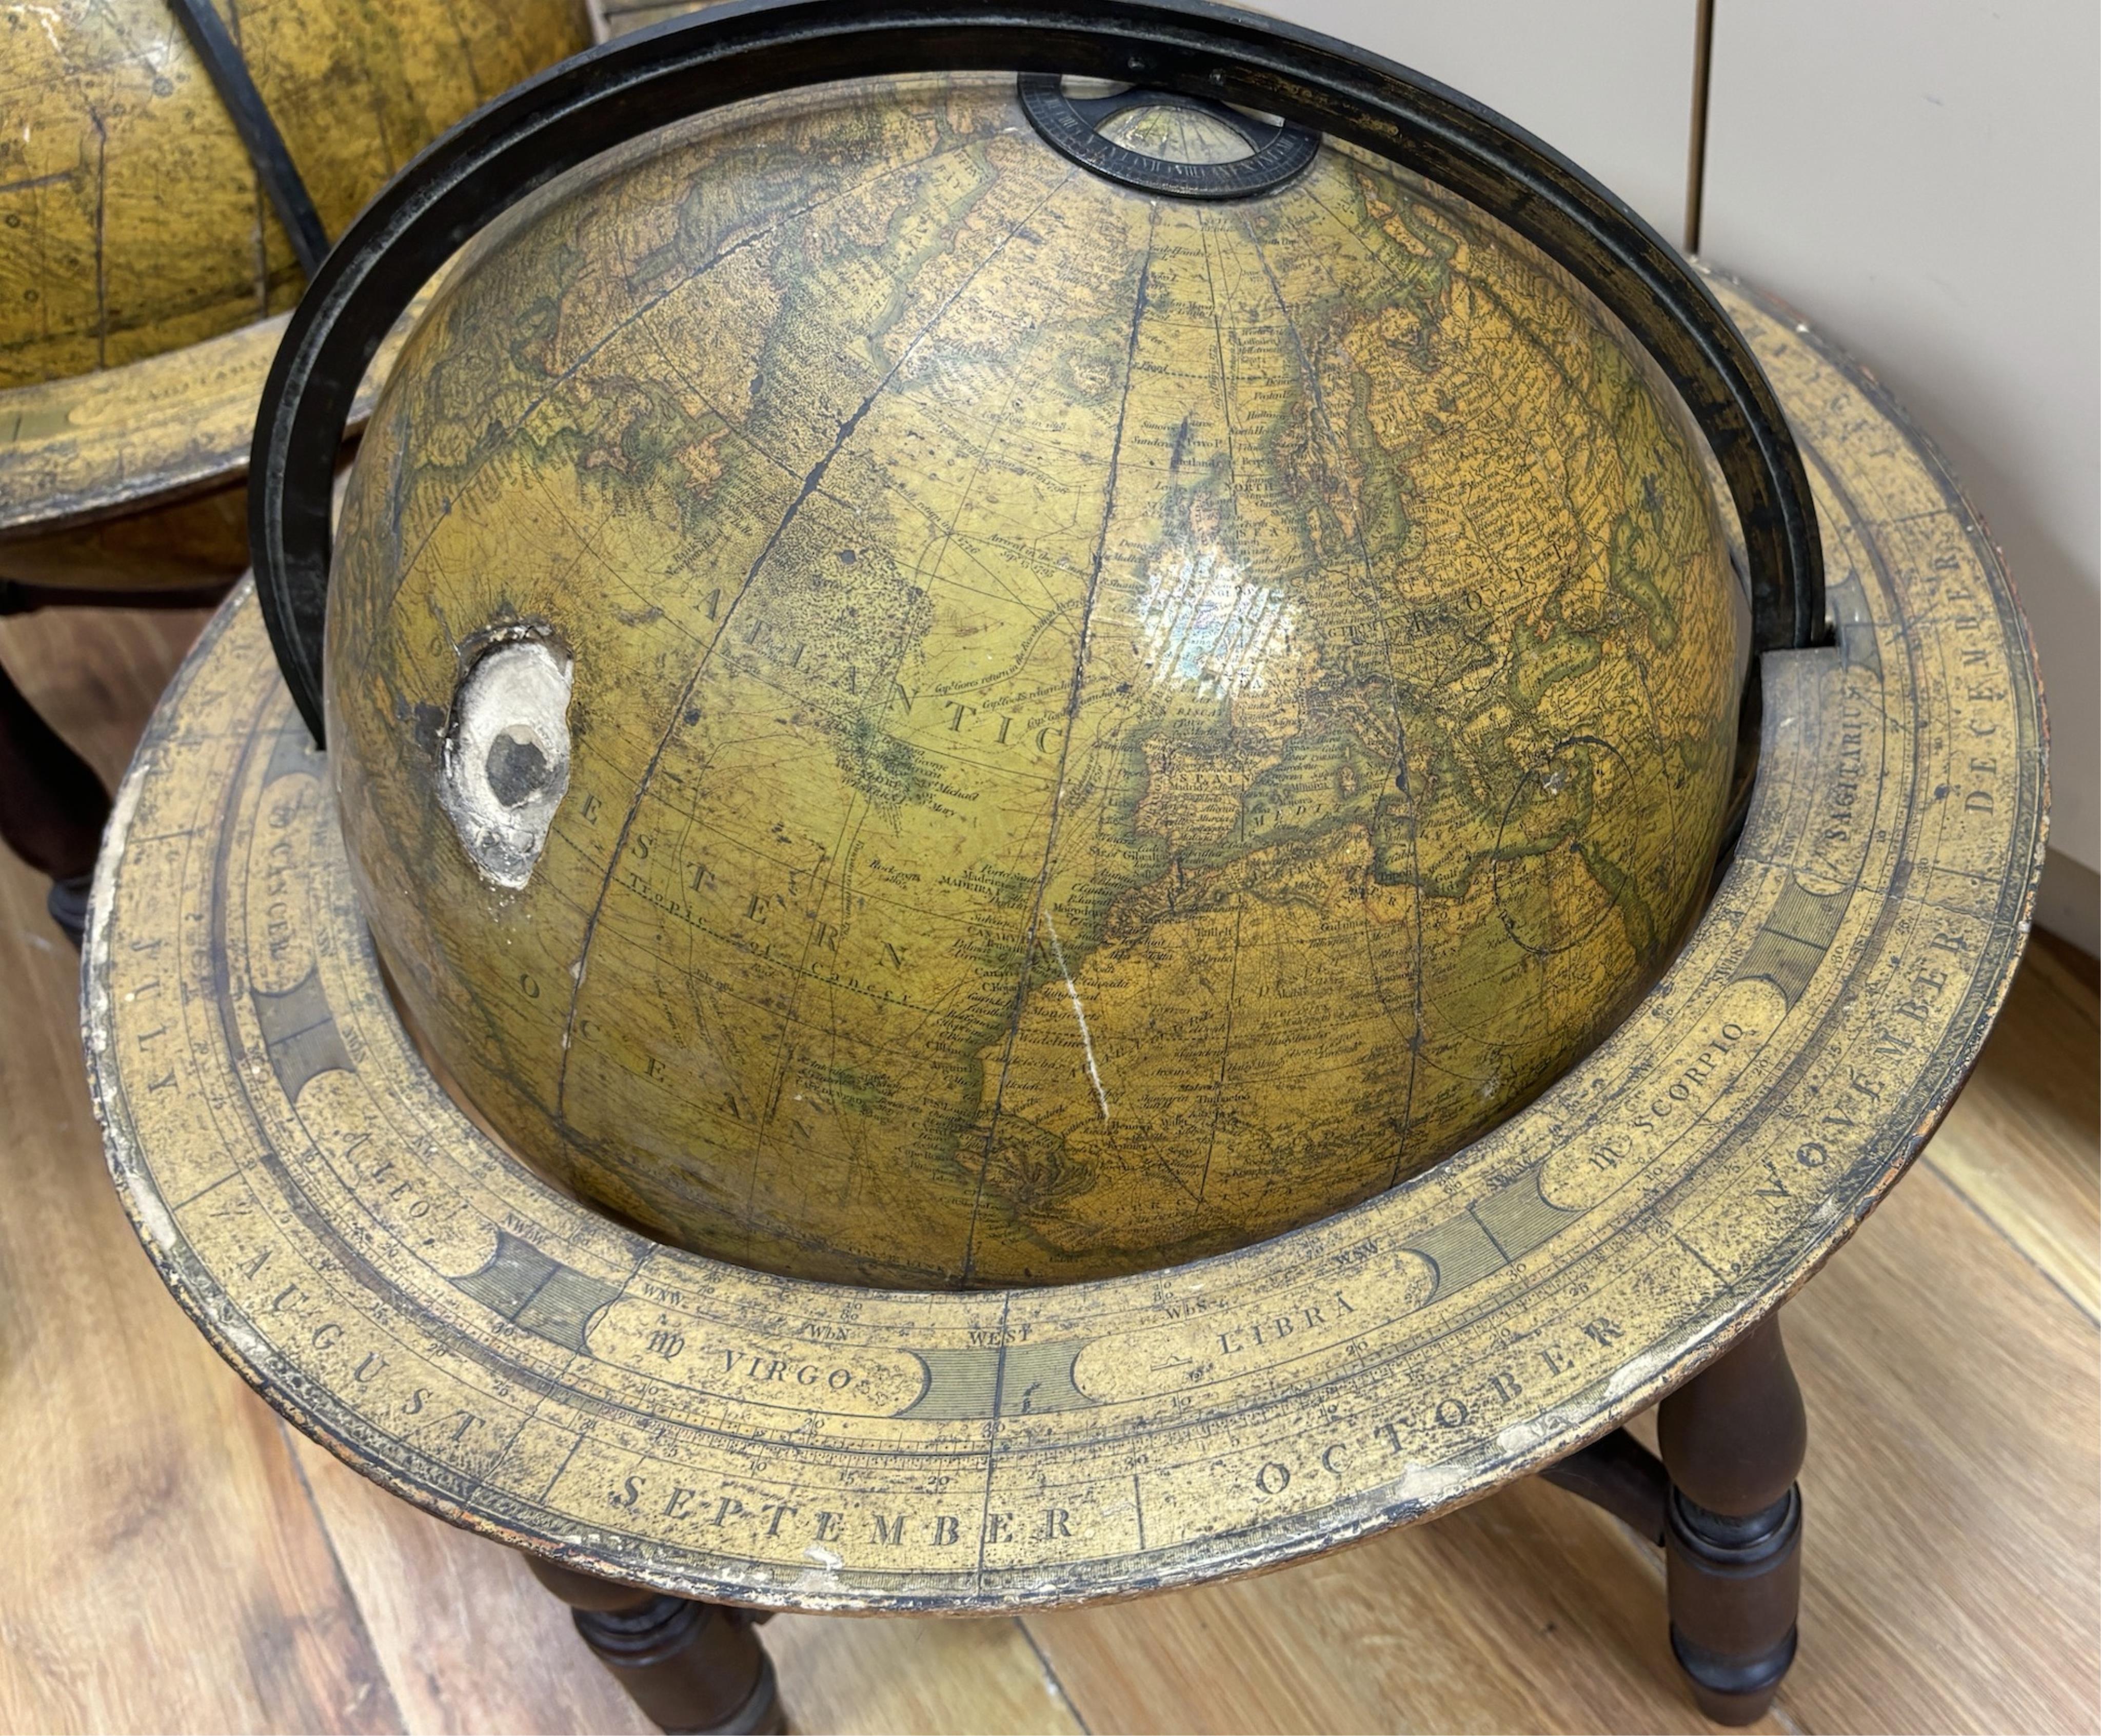 A pair of early to mid-19th century Cary celestial and terrestrial 12 inch globes with associated stands, each globe on a turned mahogany frame with applied paper zodiac and month ring at the equator